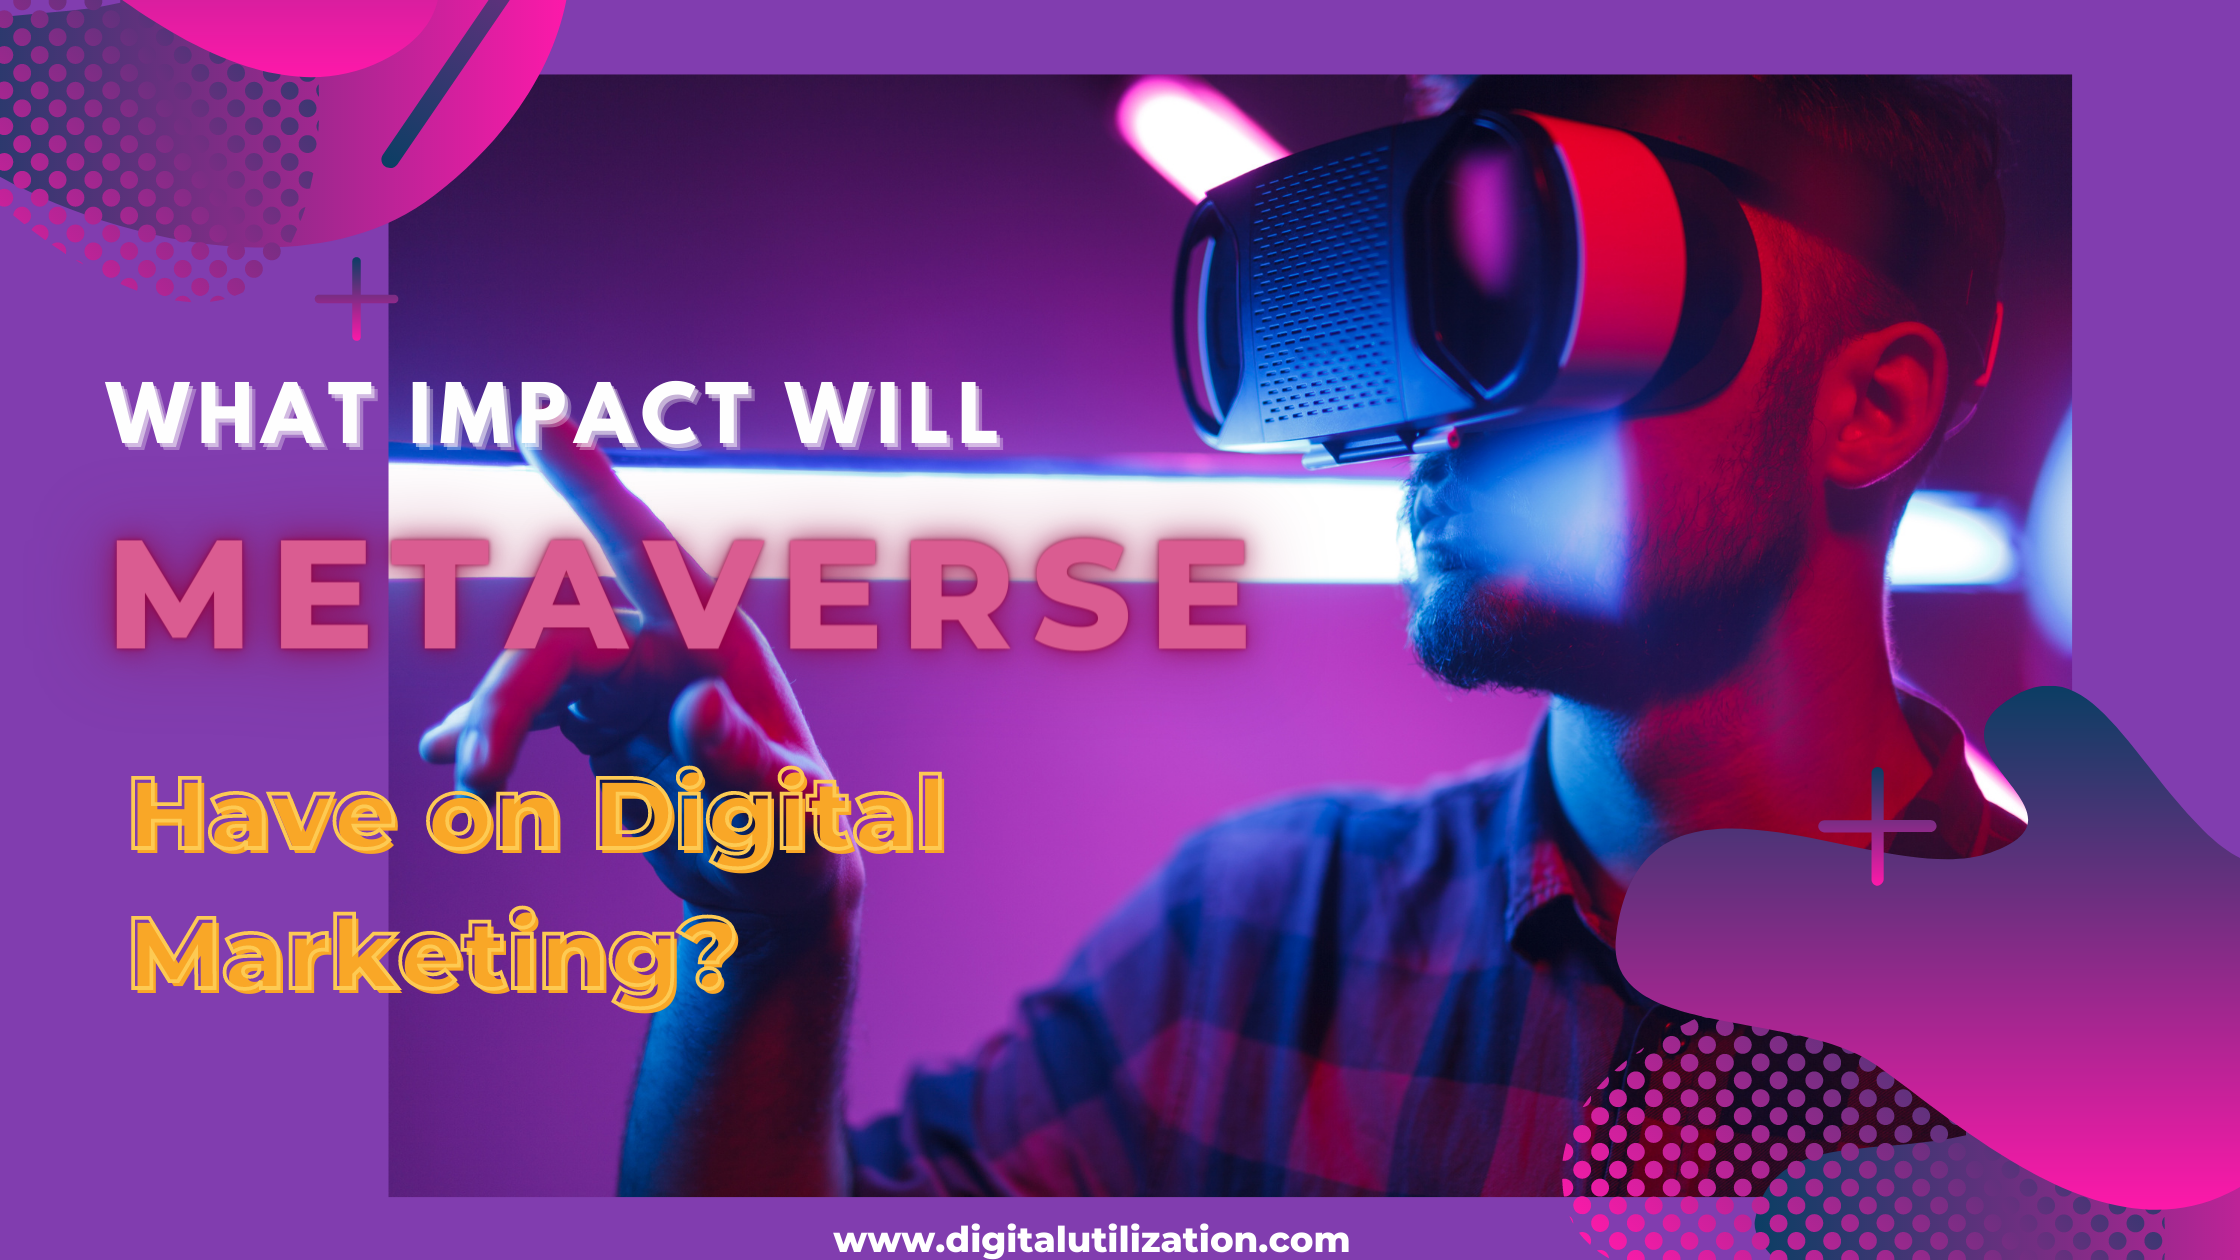 What Impact Will Metaverse Have on Digital Marketing?